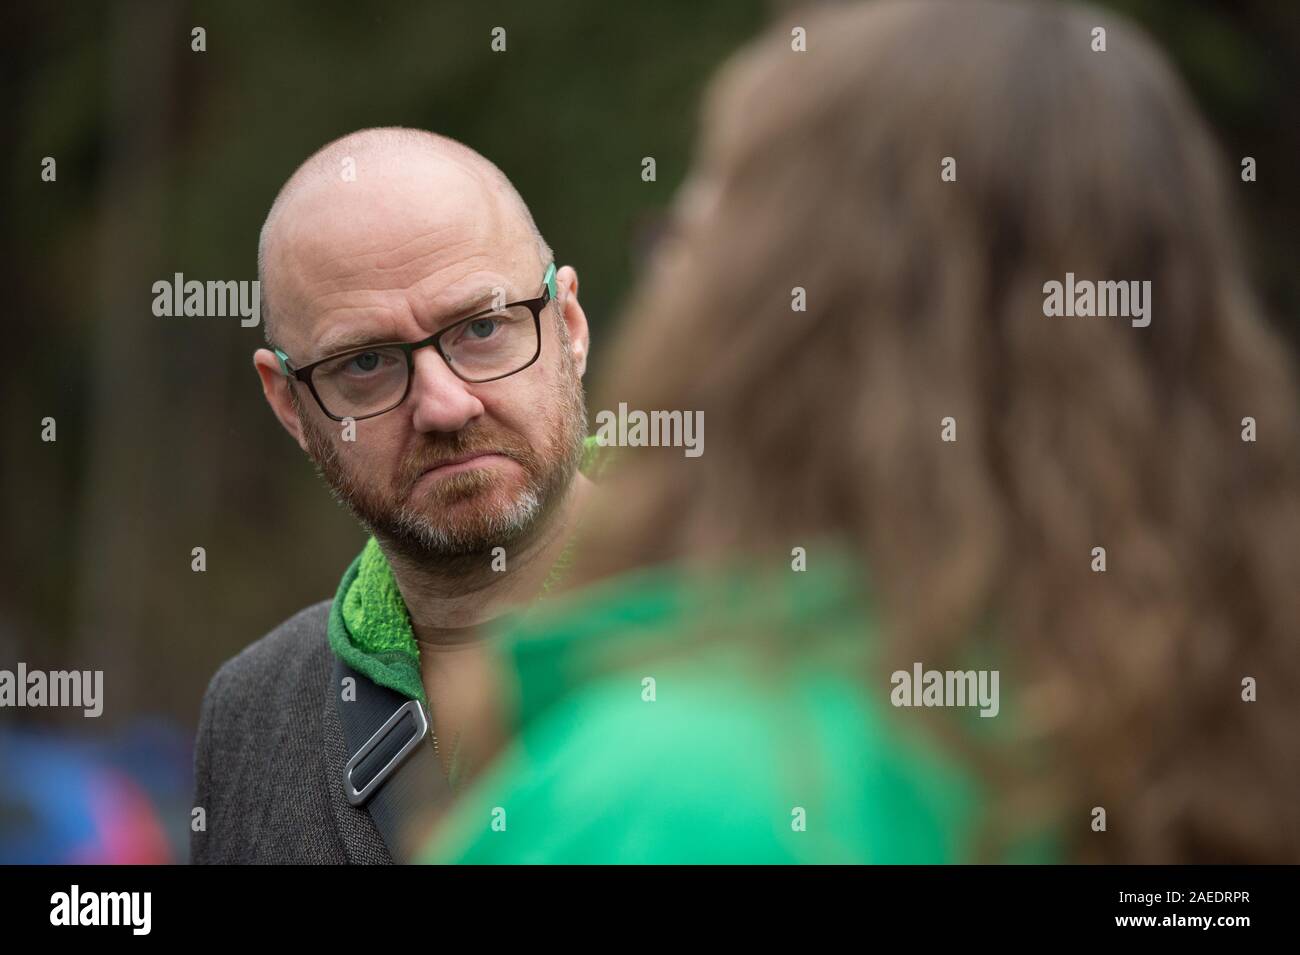 Glasgow, UK. 23 November 2019. Pictured: (L-R) Patrick Harvie MSP - Co Leader of the Scottish Green Party; Angela Barron - Director of Recyke-a-bike. Scottish Greens co-leader Patrick Harvie will join environment spokesperson Mark Ruskell MSP and Scottish Greens candidate for Stirling Bryan Quinn to repair some bicycles.  Credit: Colin Fisher/Alamy Live News. Stock Photo